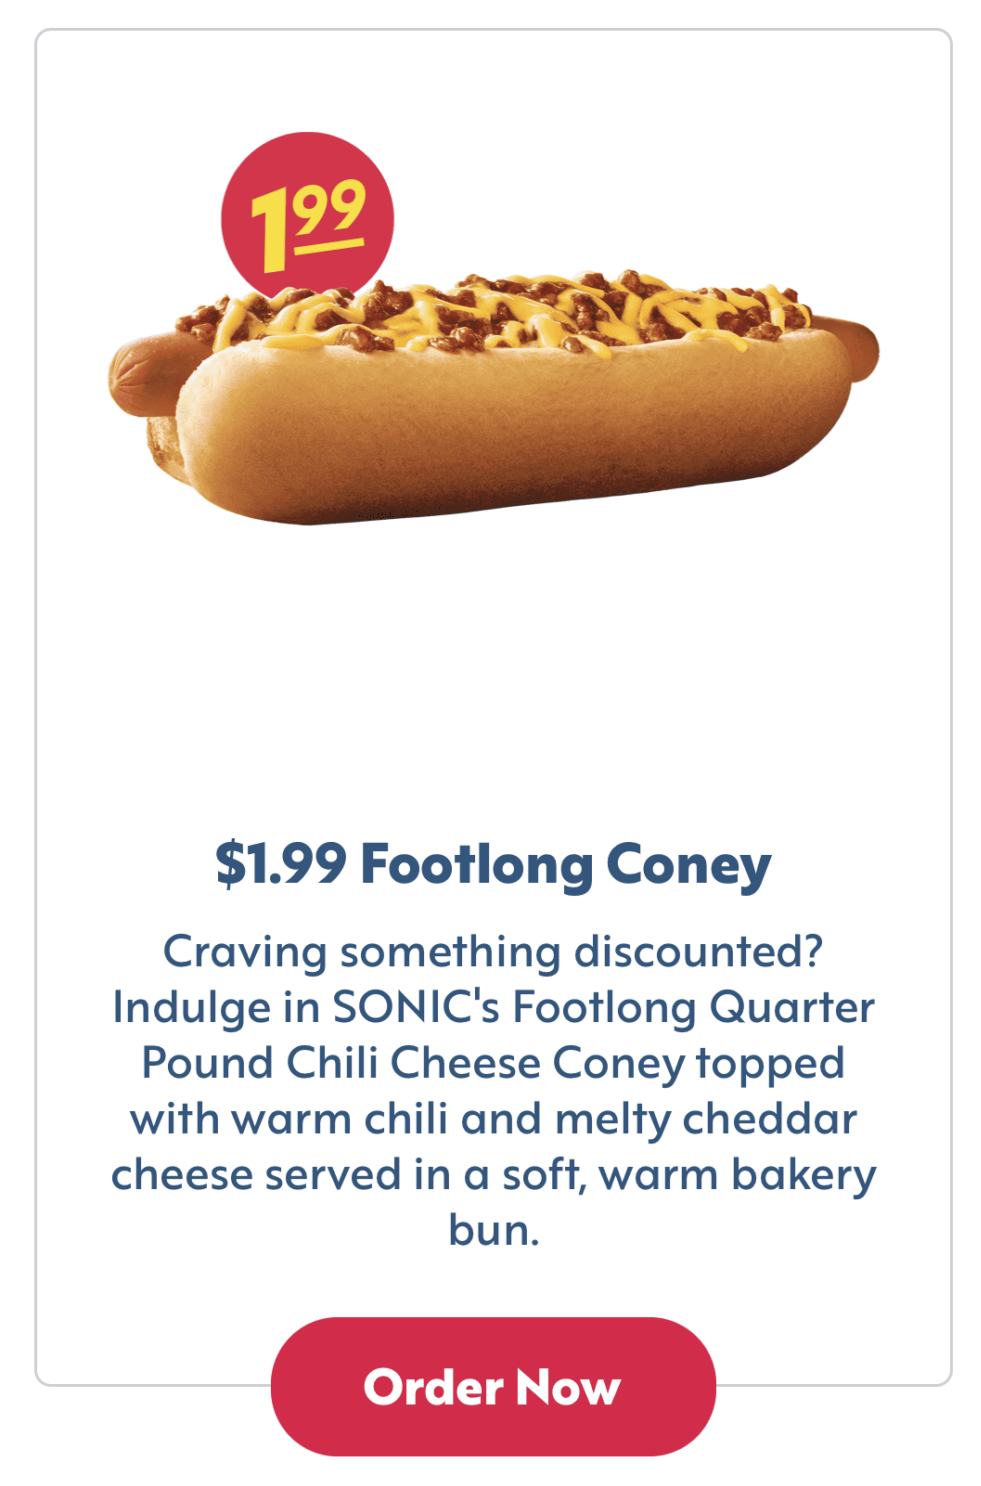 Updated Sonic Drive-In Menu Price Increases Near Me (2022)